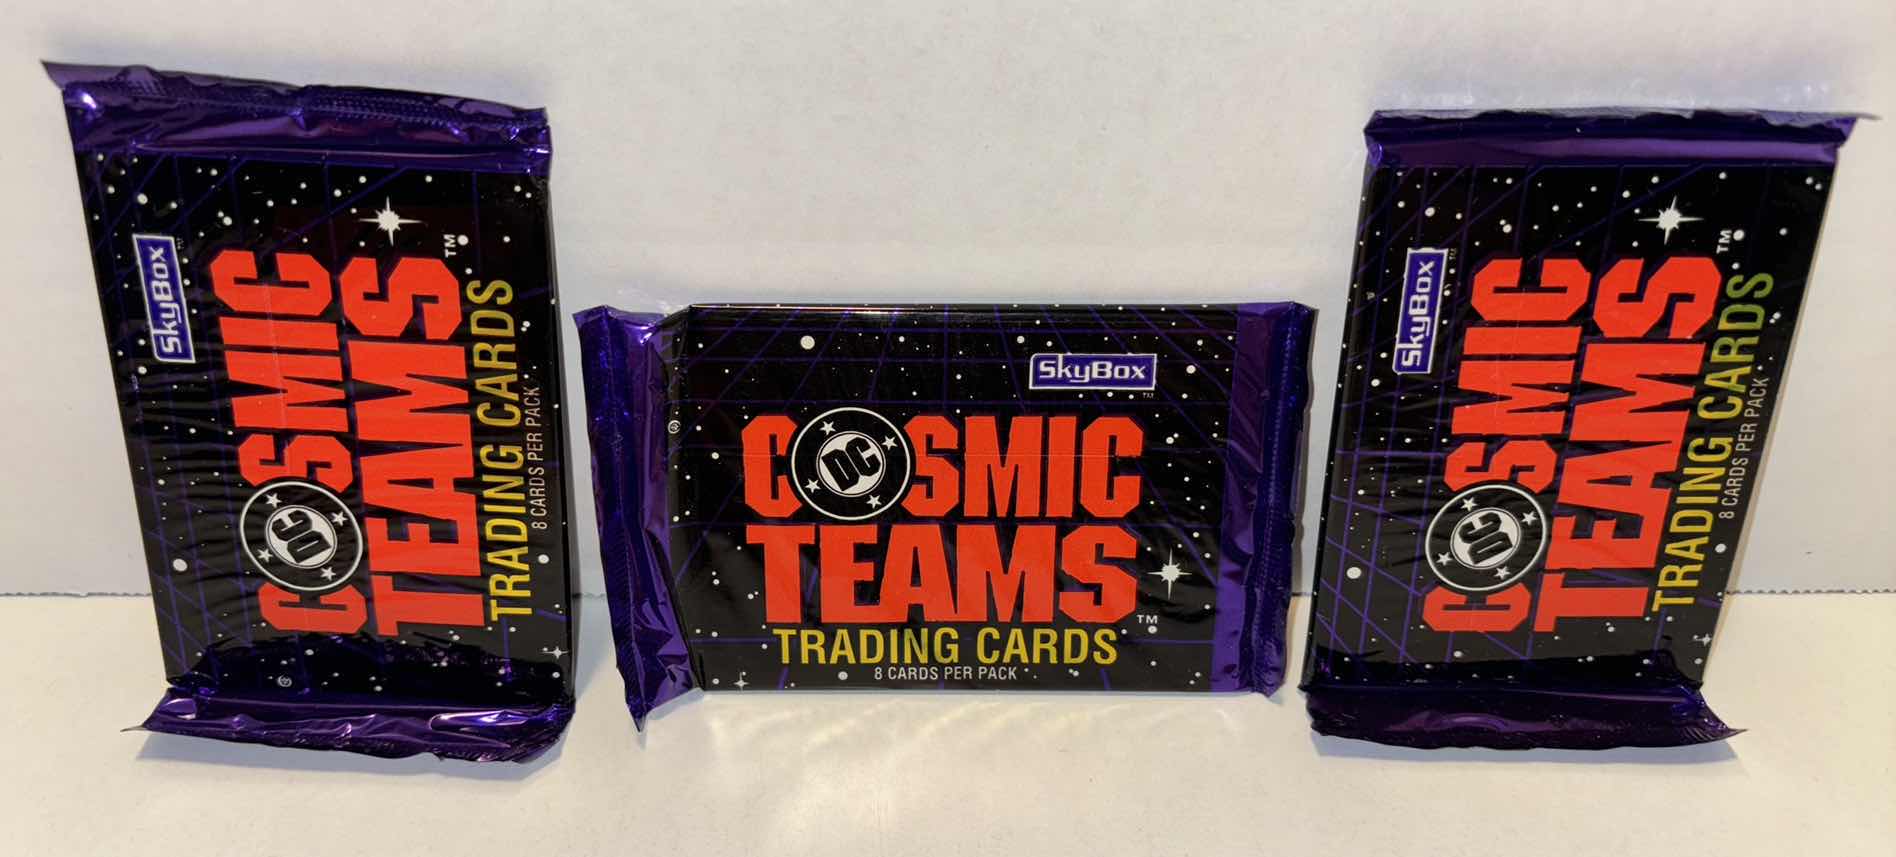 Photo 1 of NEW 3-PACK VINTAGE SKY BOX 1993 DC COMICS “COSMIC TEAMS TRADING CARDS” 8 CARDS PER PACK